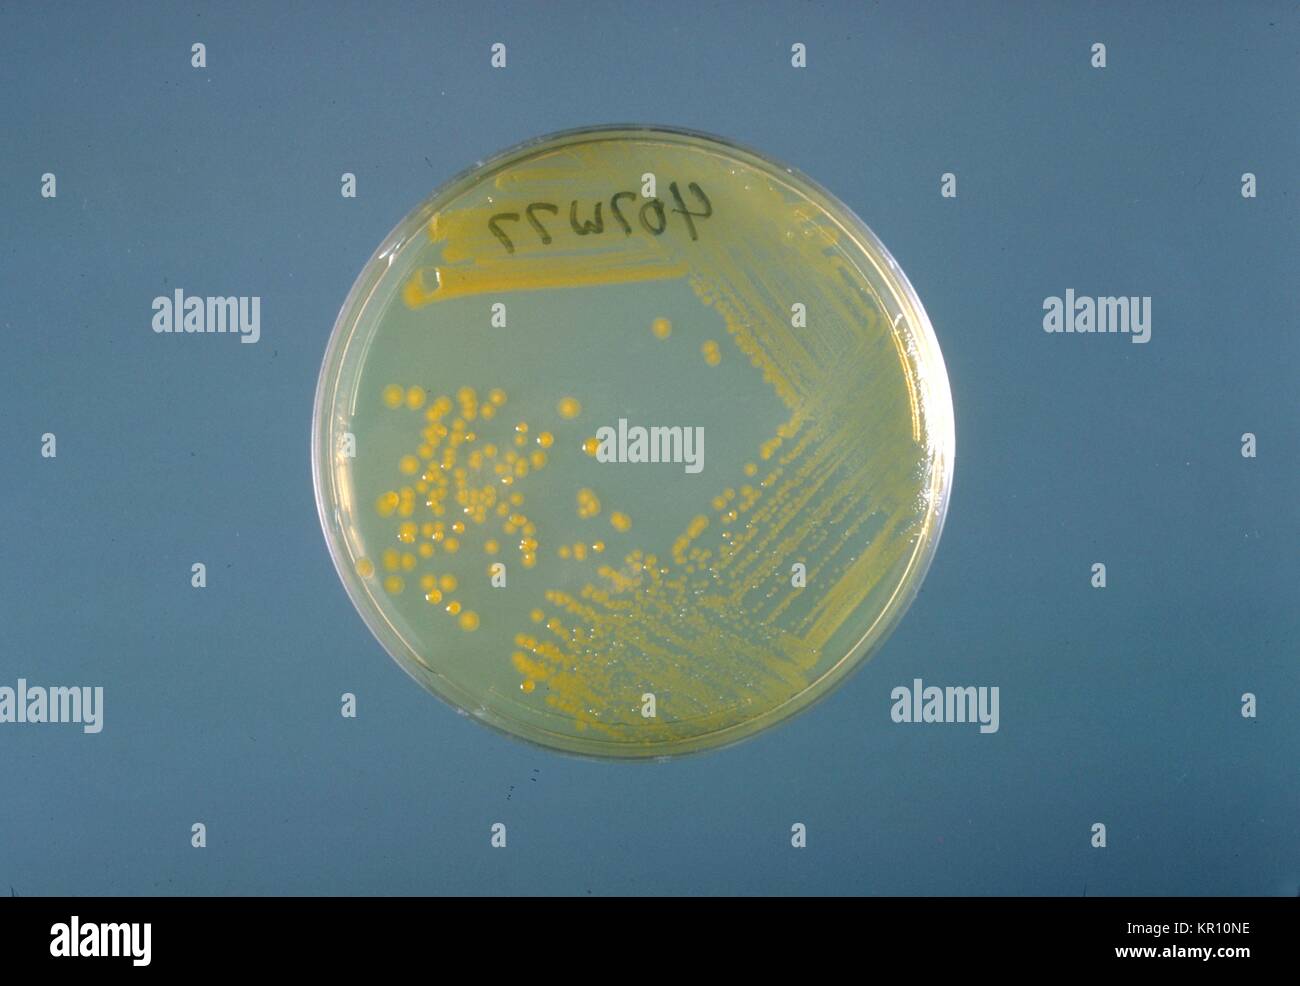 This is a trypticase soy agar plate culture of Enterobacter sakazakii after three days of growth at 25{degrees} C. Enterobacter sakazakii, a gram-negative, rod-shaped bacterium, is from the family Enterobacteriaceae, 1978. E. sakazakii is associated with a rare, but often fatal form of neonatal meningitis with a mortality rate of 40 to 80 per cent. Image courtesy CDC/Dr. J. J. farmer. Stock Photo